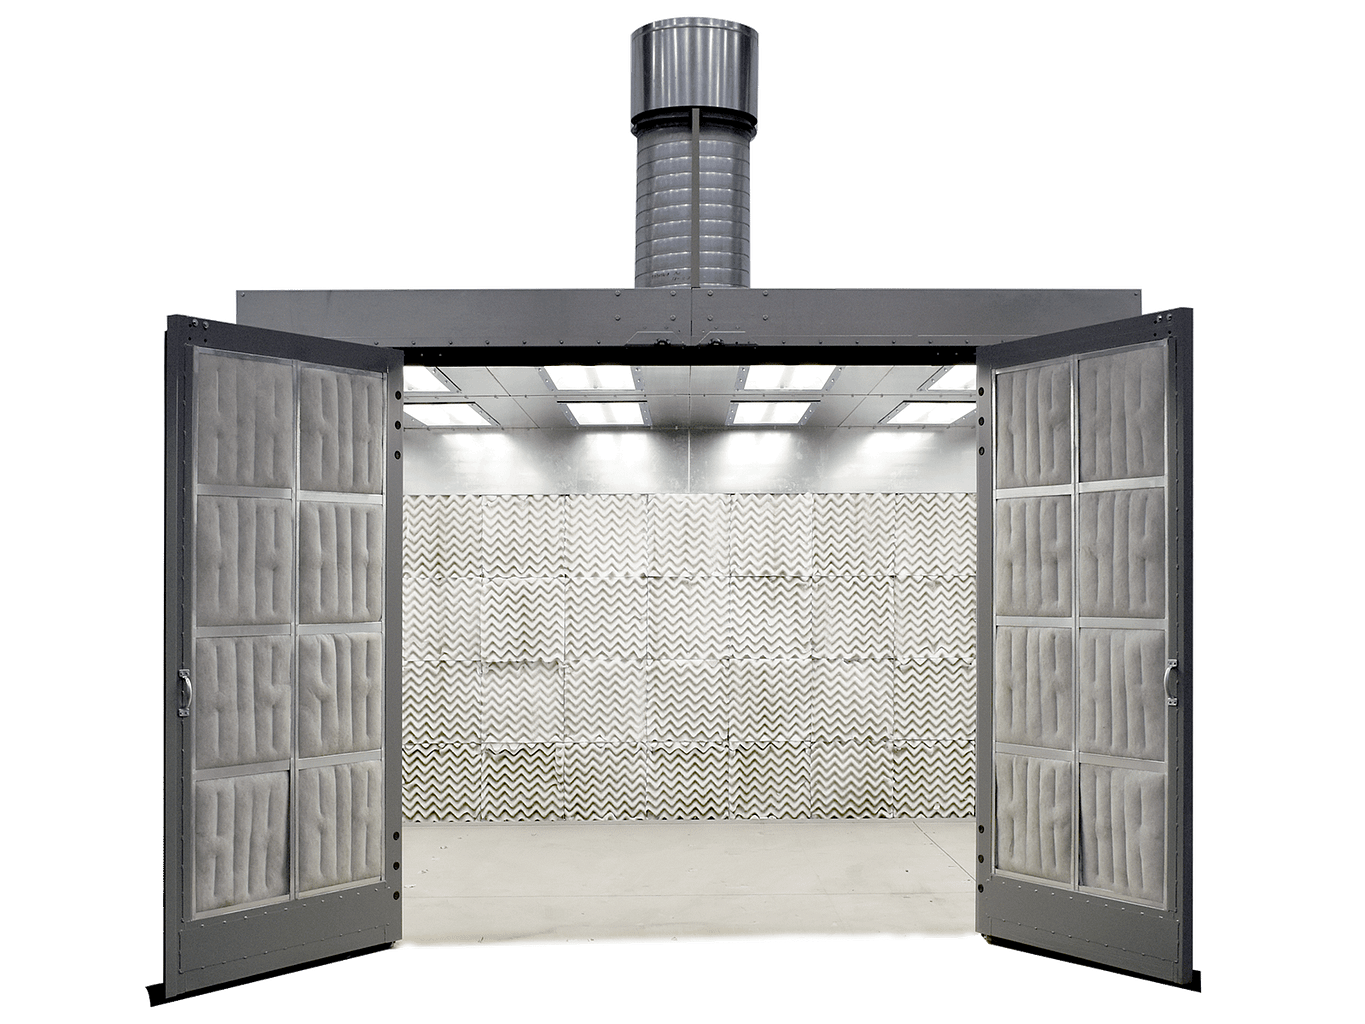 Enclosed Faced paint booth